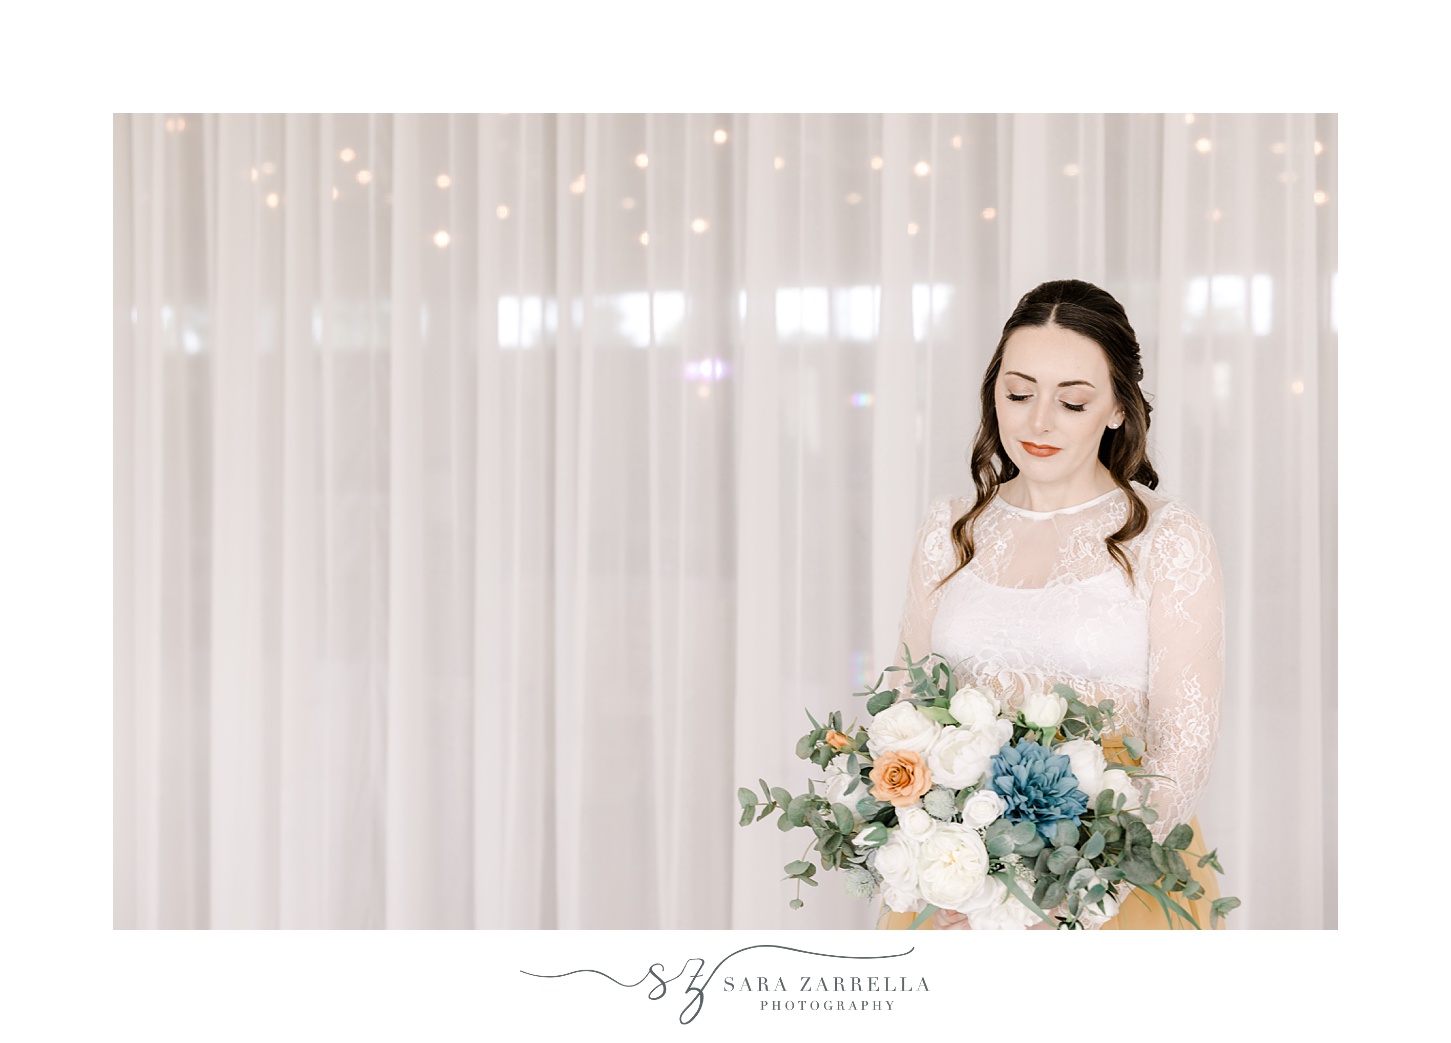 brunette woman looks at bouquet of white, blue, and orange flowers 